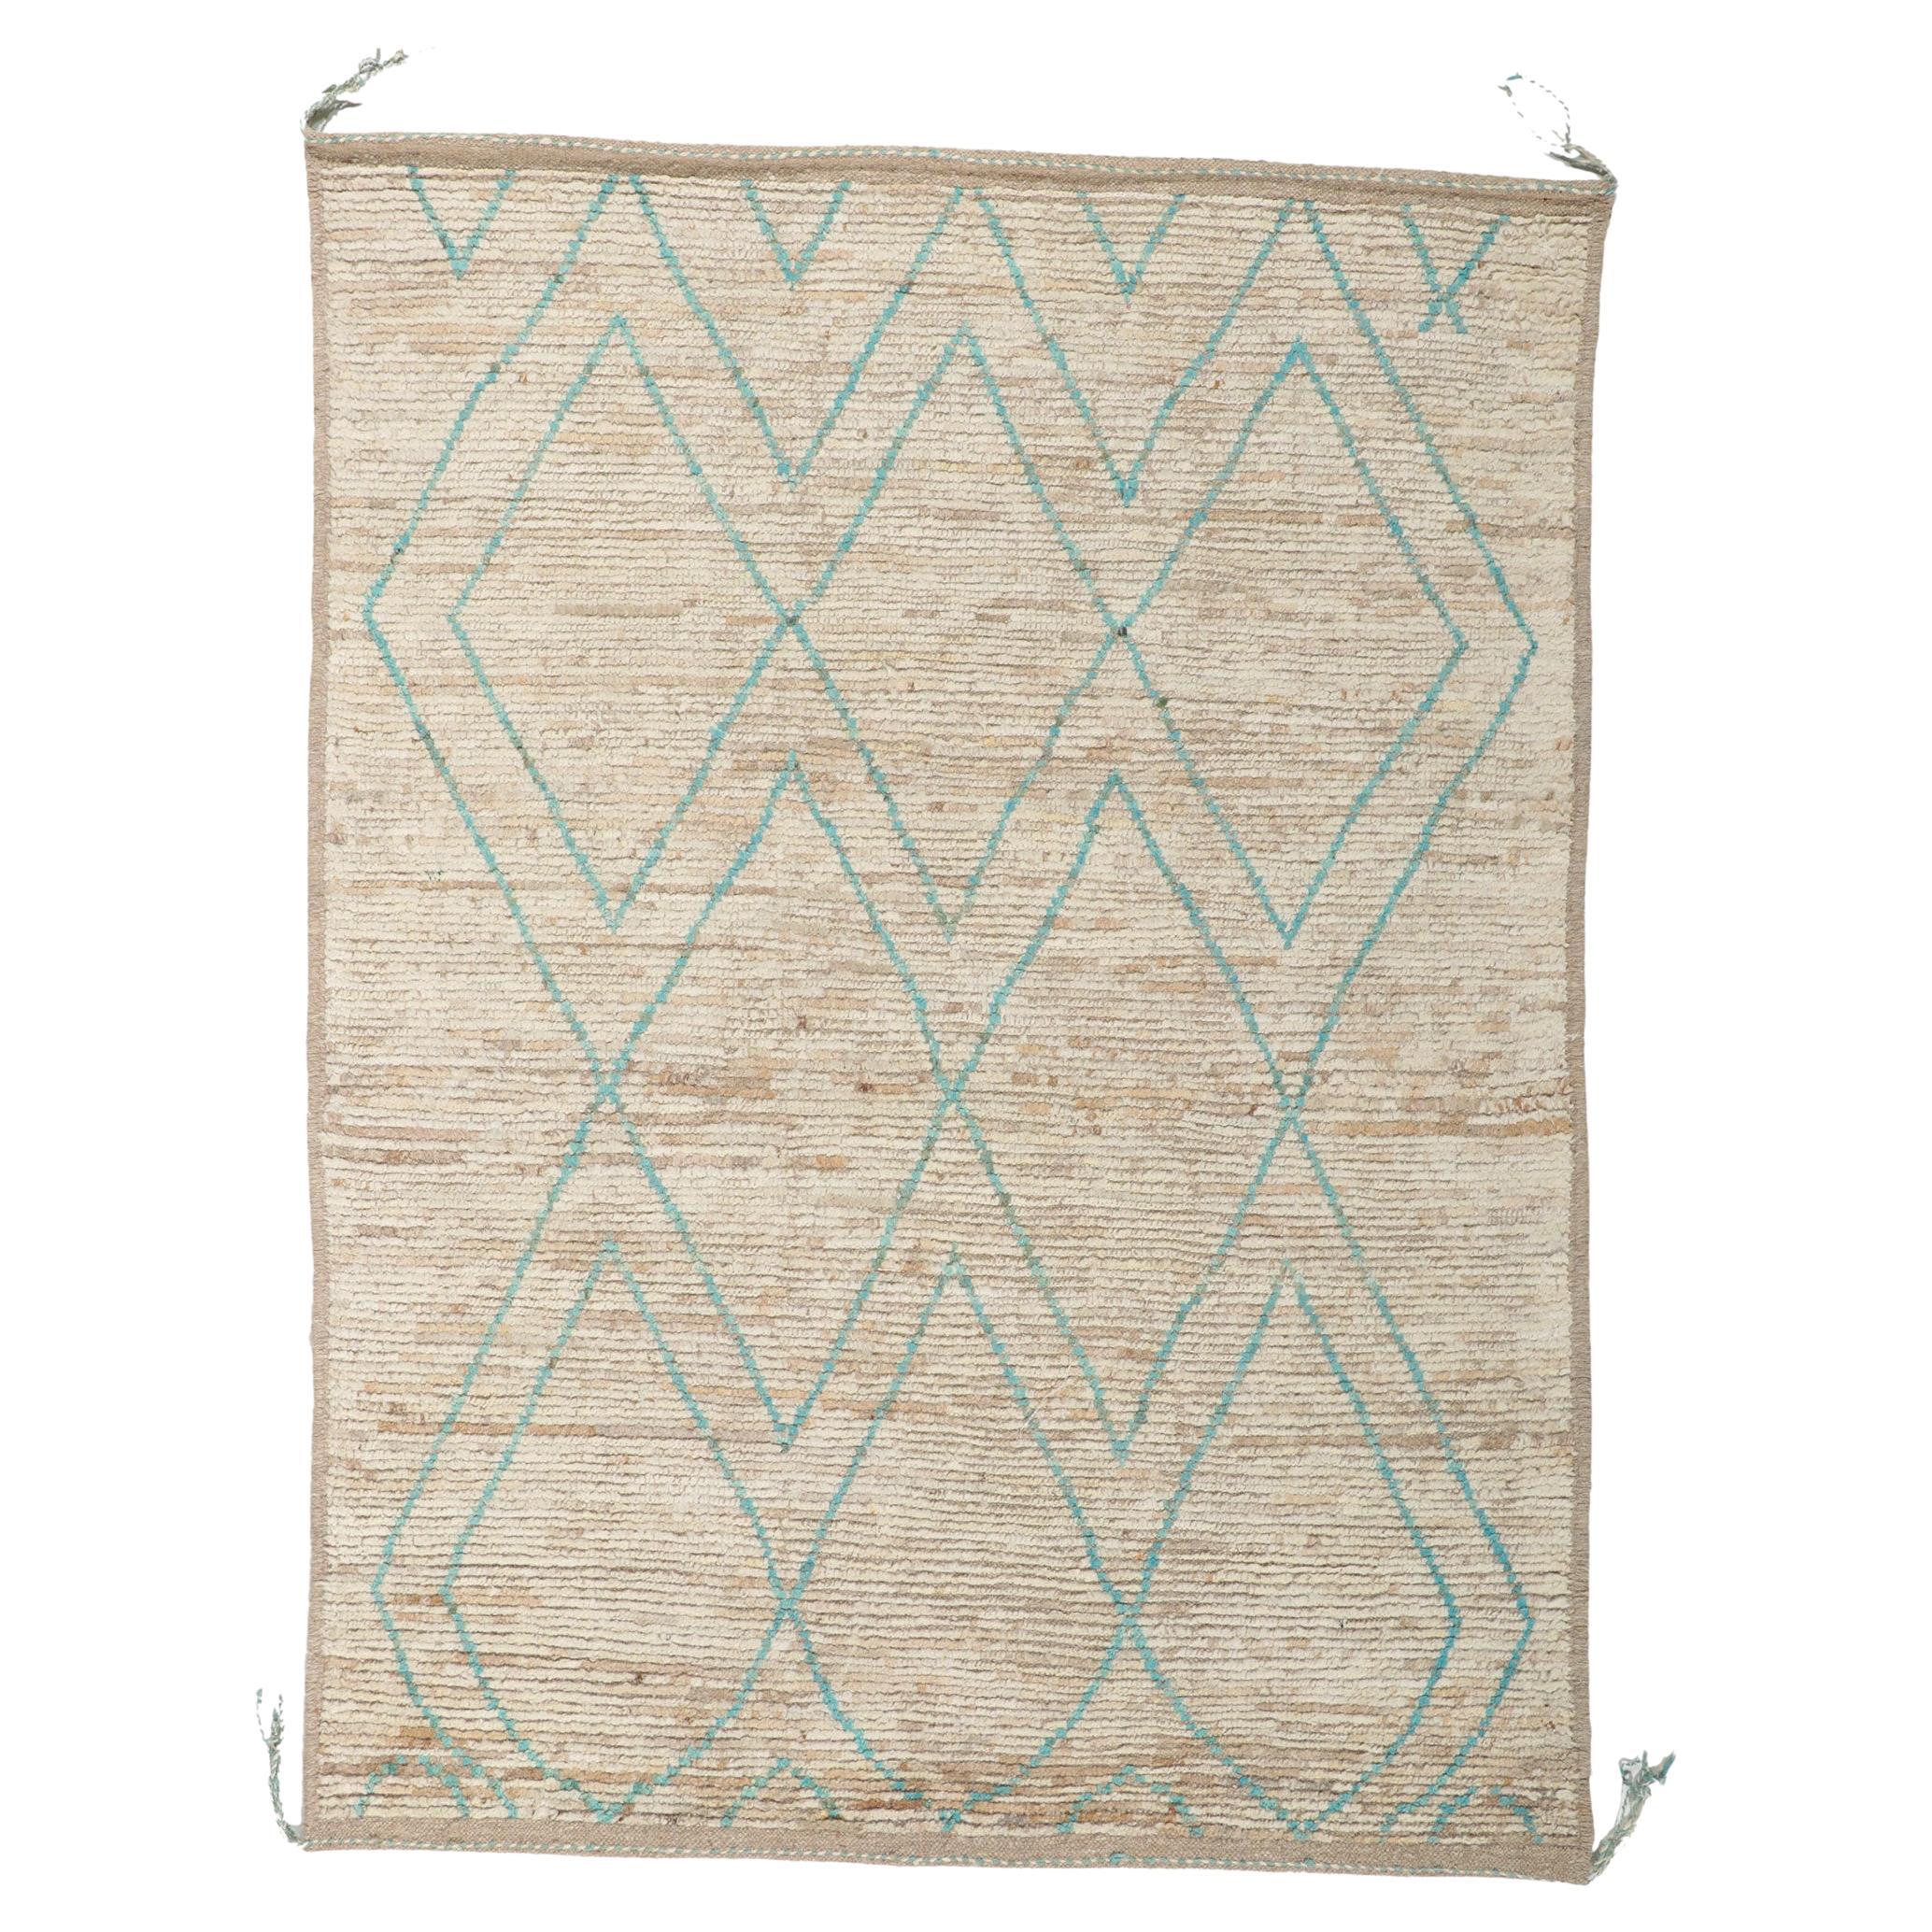 New Contemporary Moroccan Rug with Short Pile